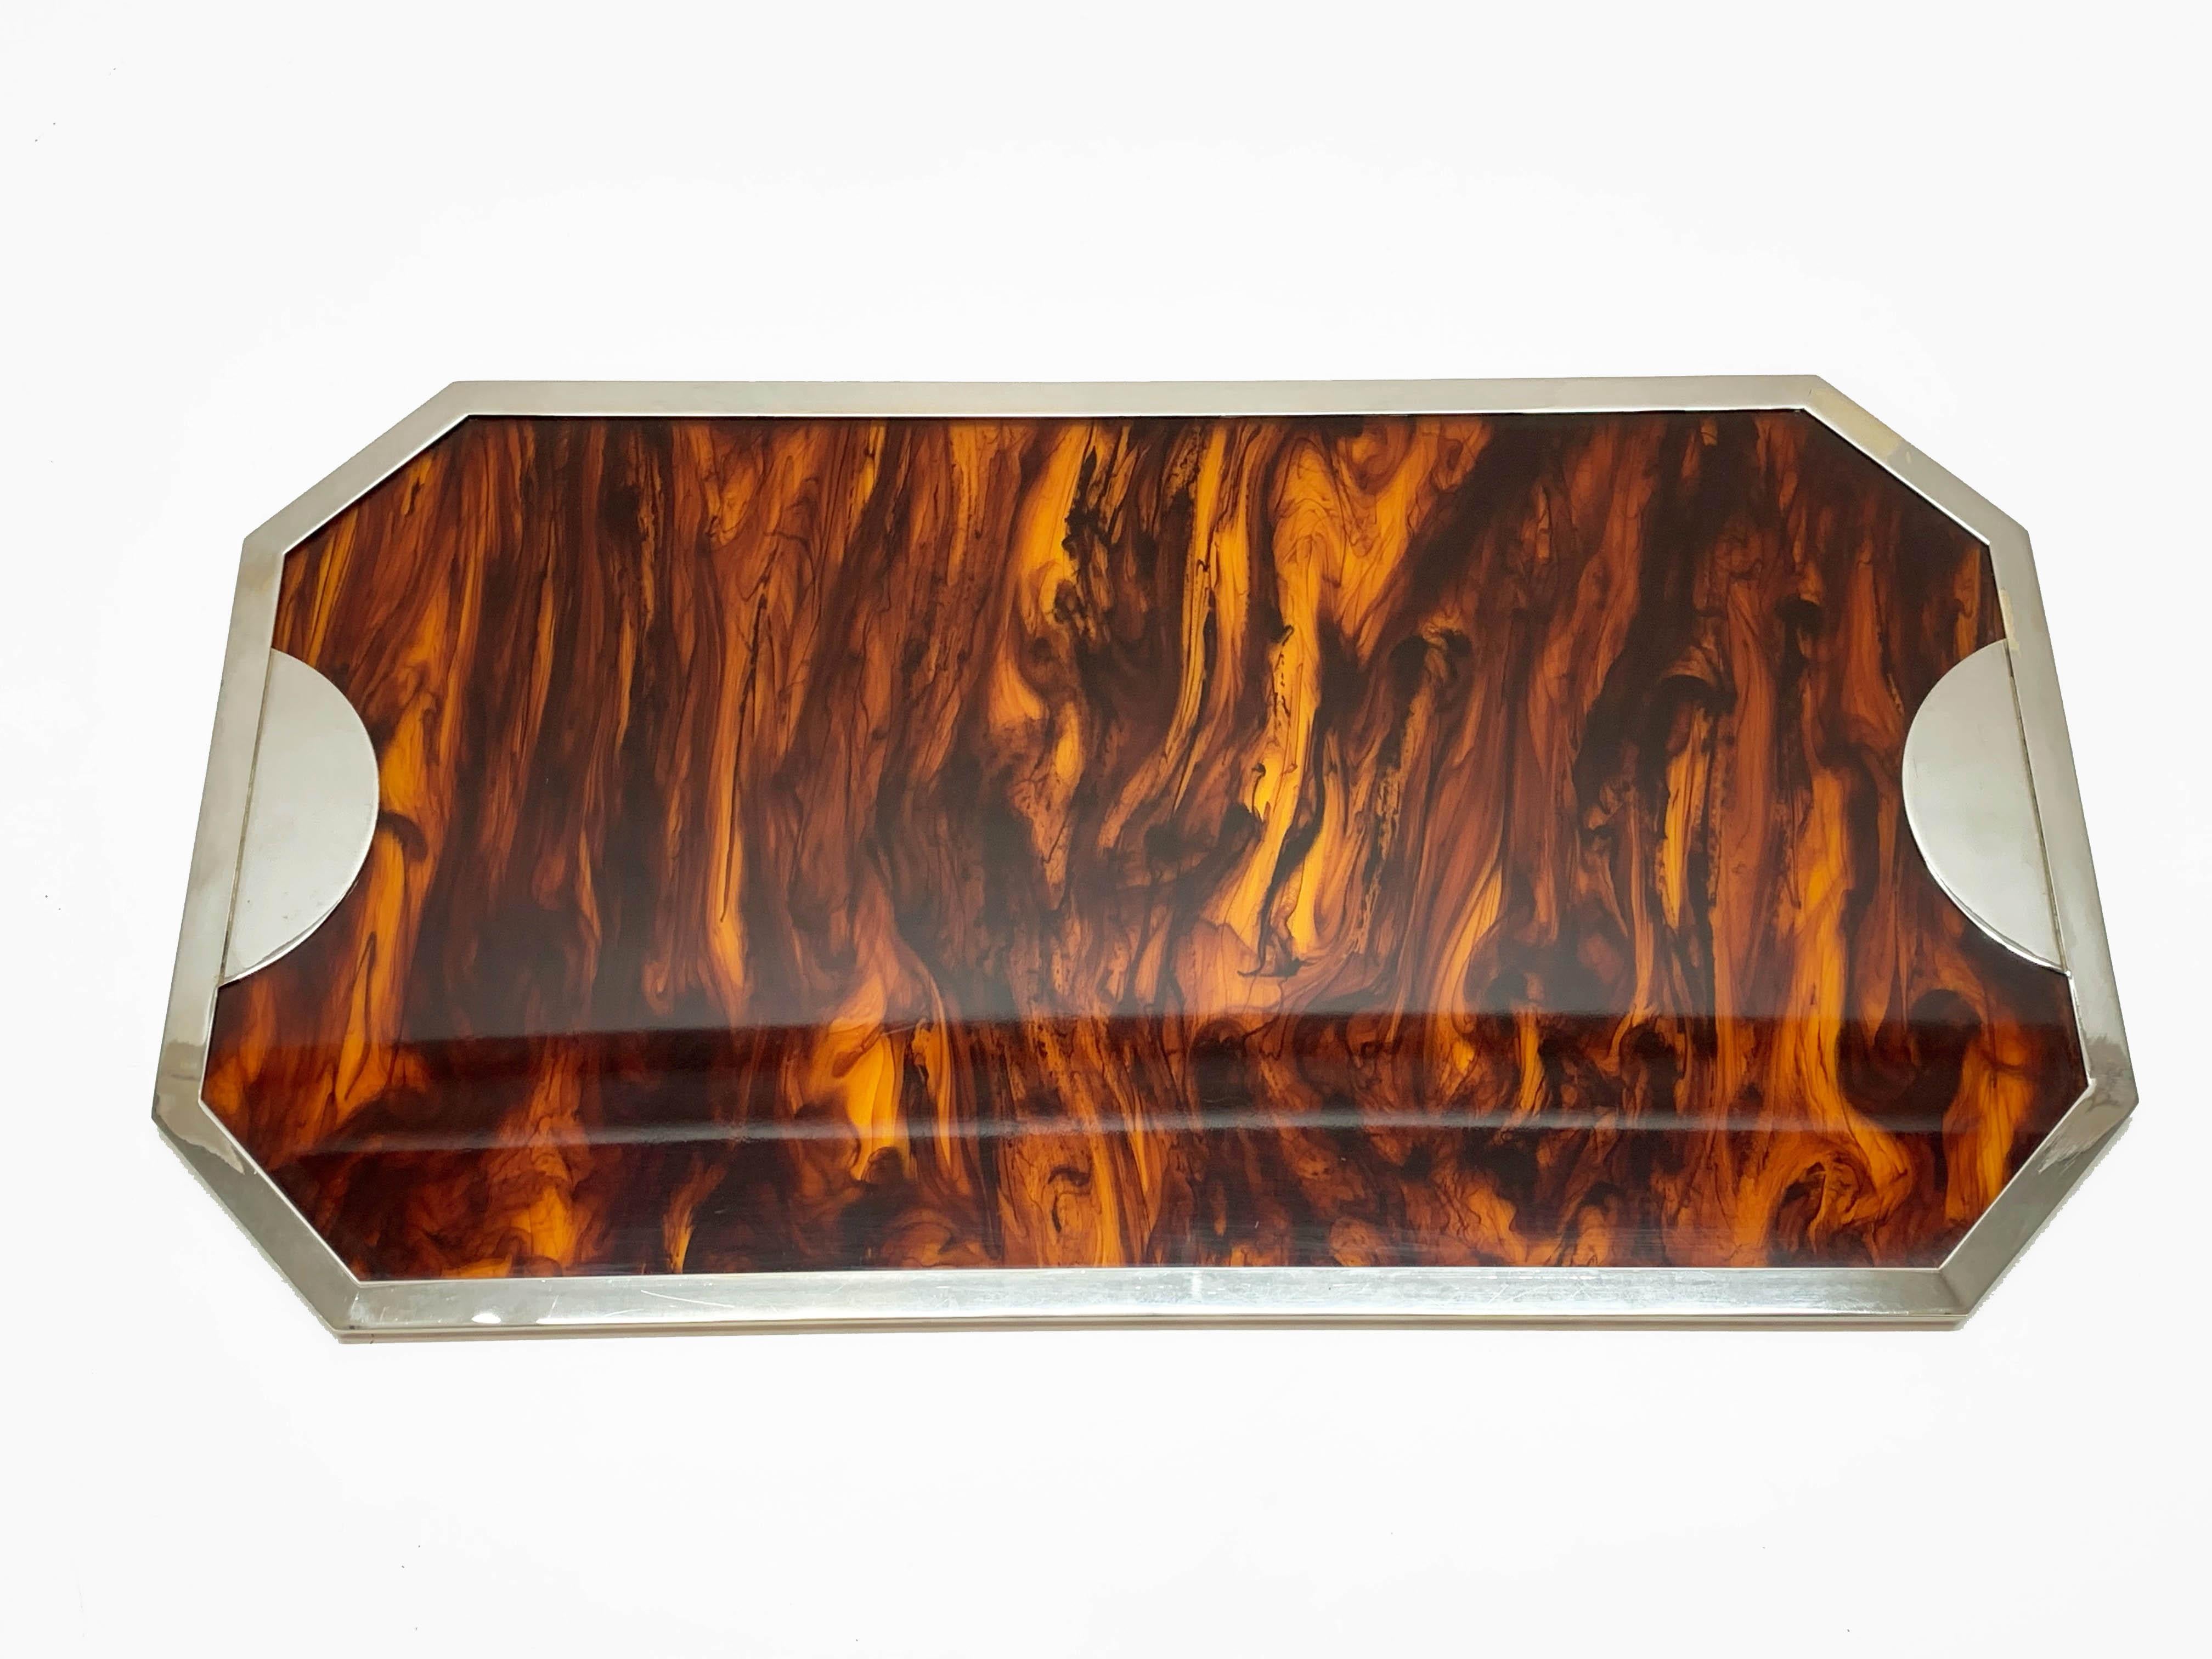 20th Century Christian Dior Midcentury Lucite and Chome Serving Tray after Willy Rizzo, 1970s